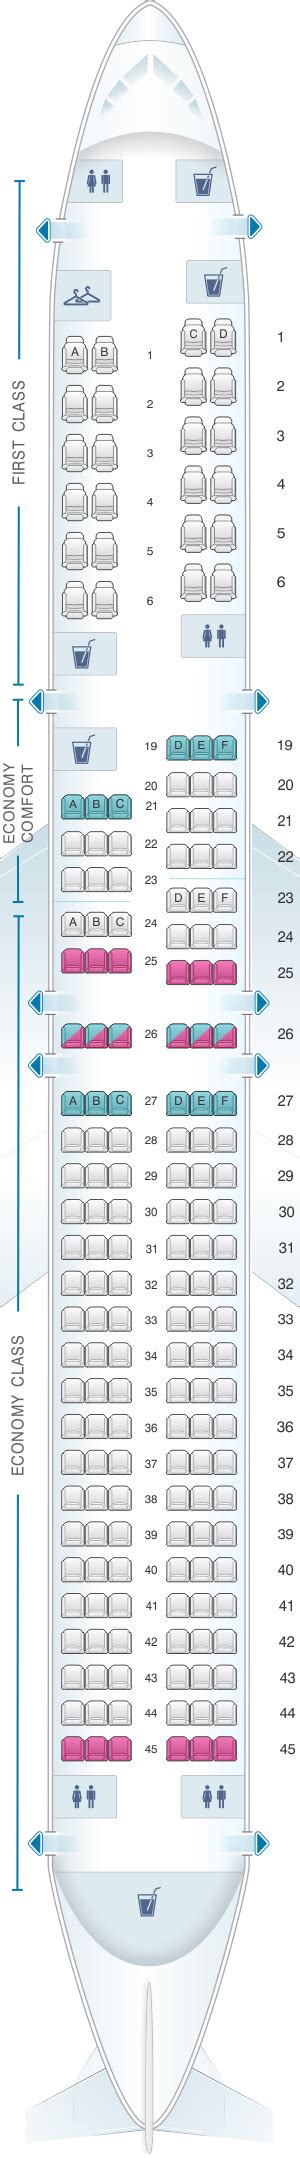 Airbus A220 Delta Seat Map